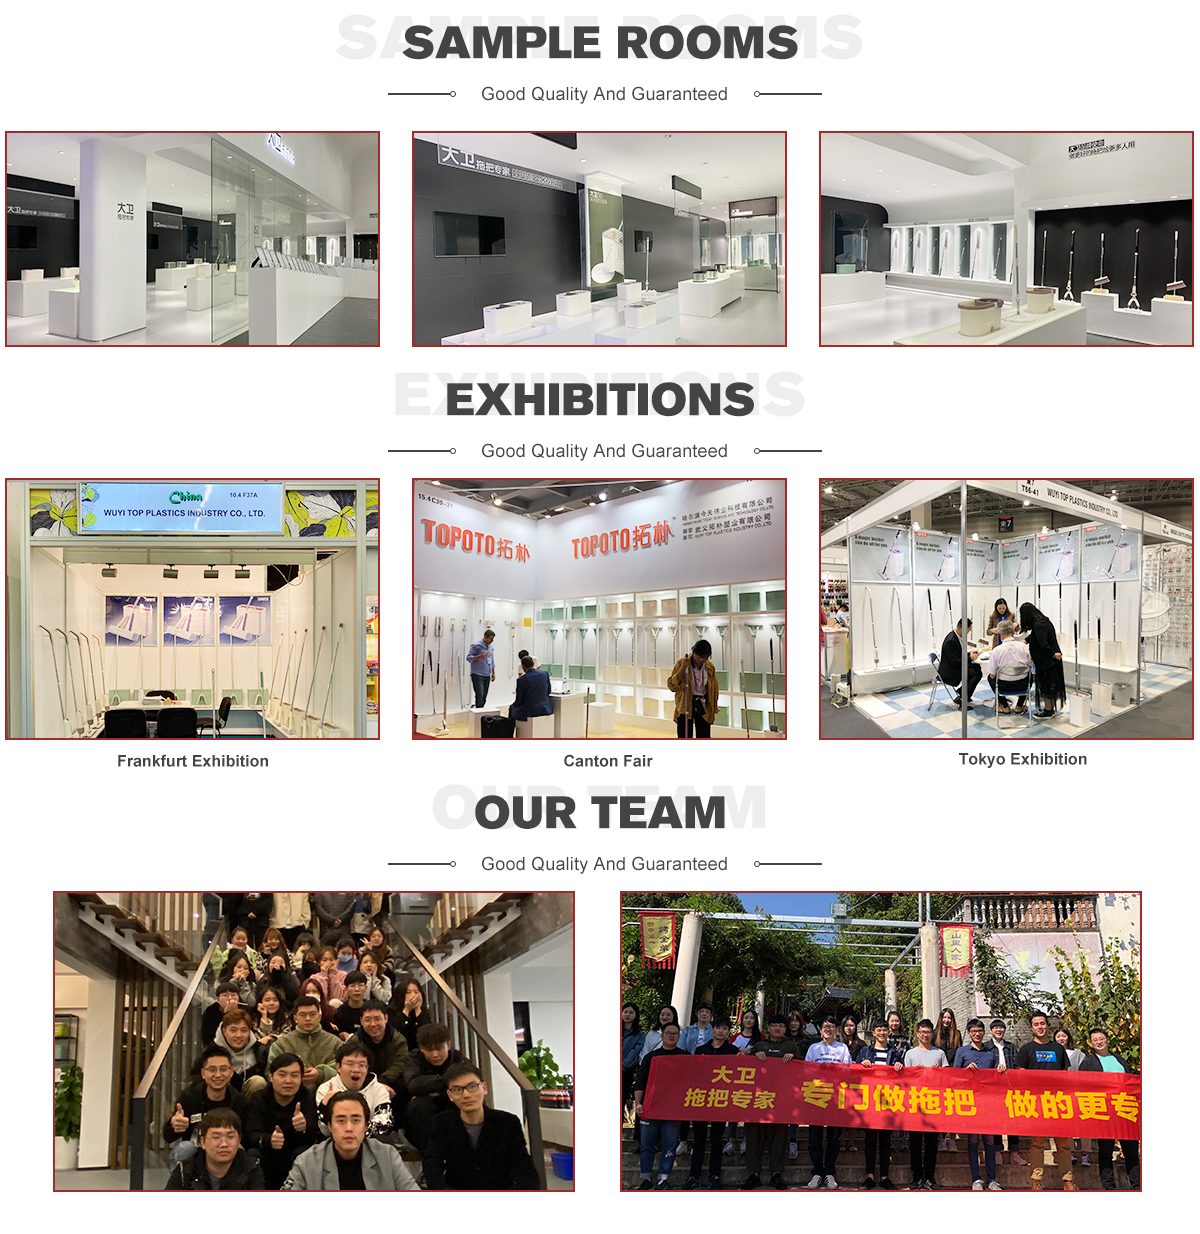 Company sample room, exhibitions show, and our team